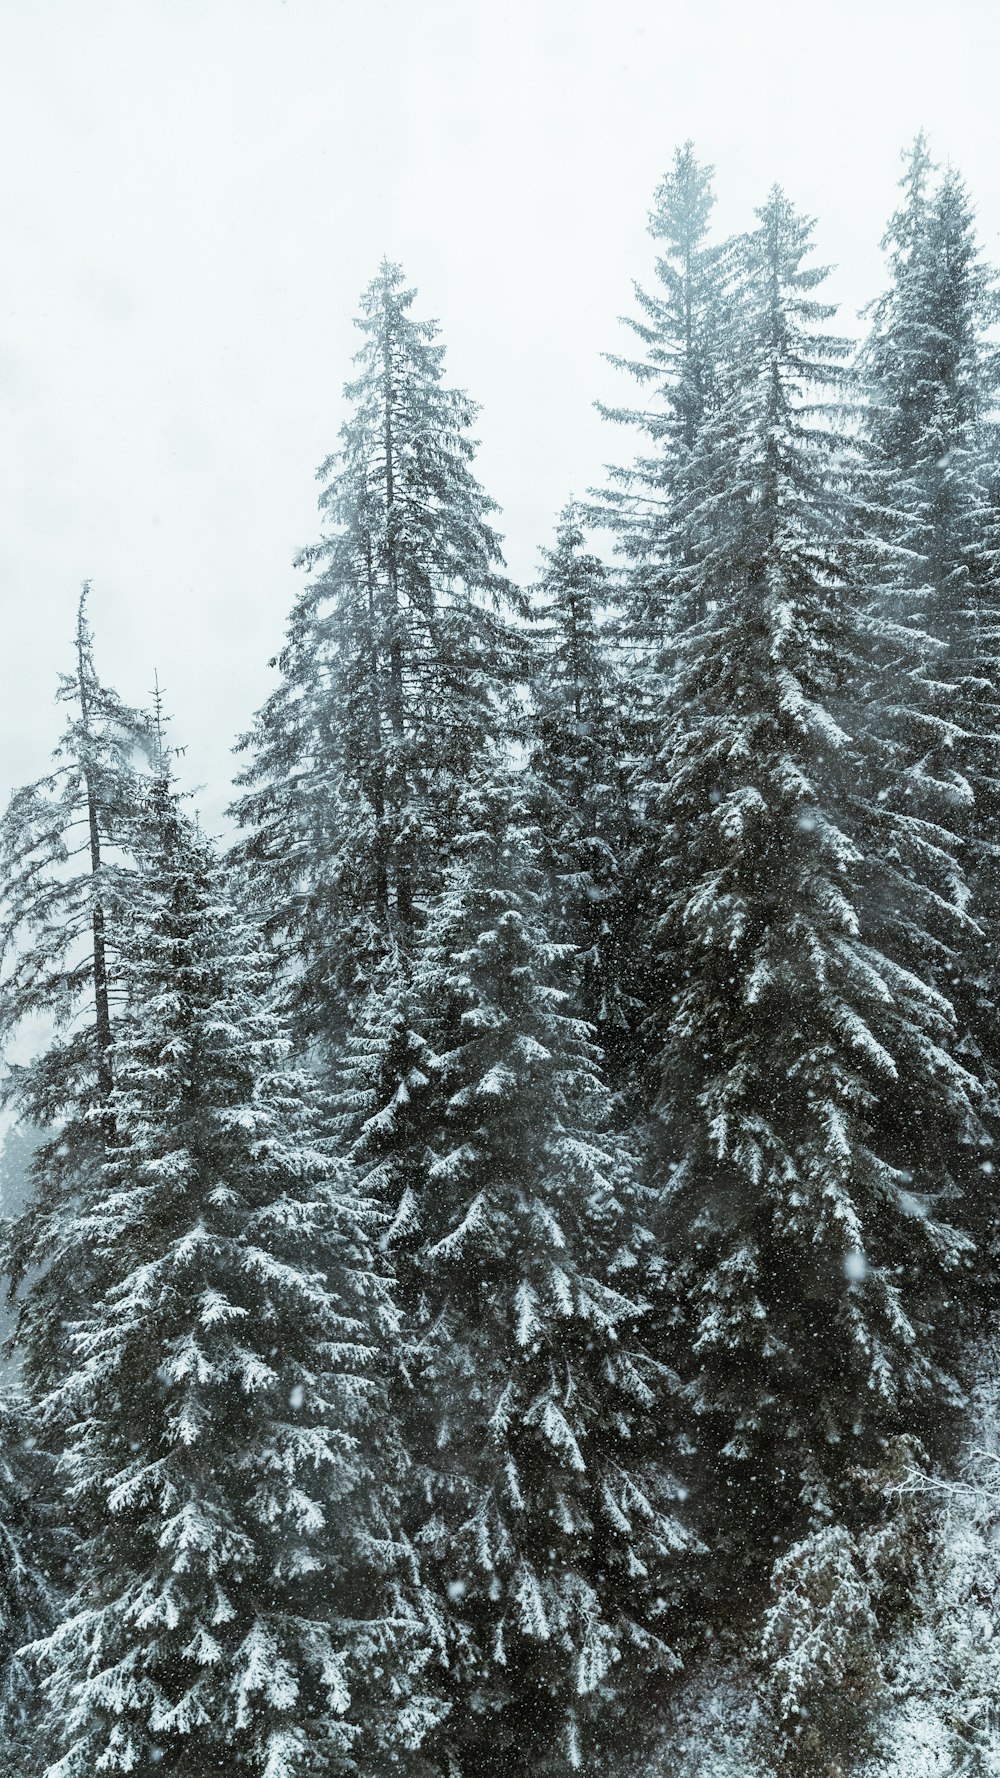 pinetrees covered with snow